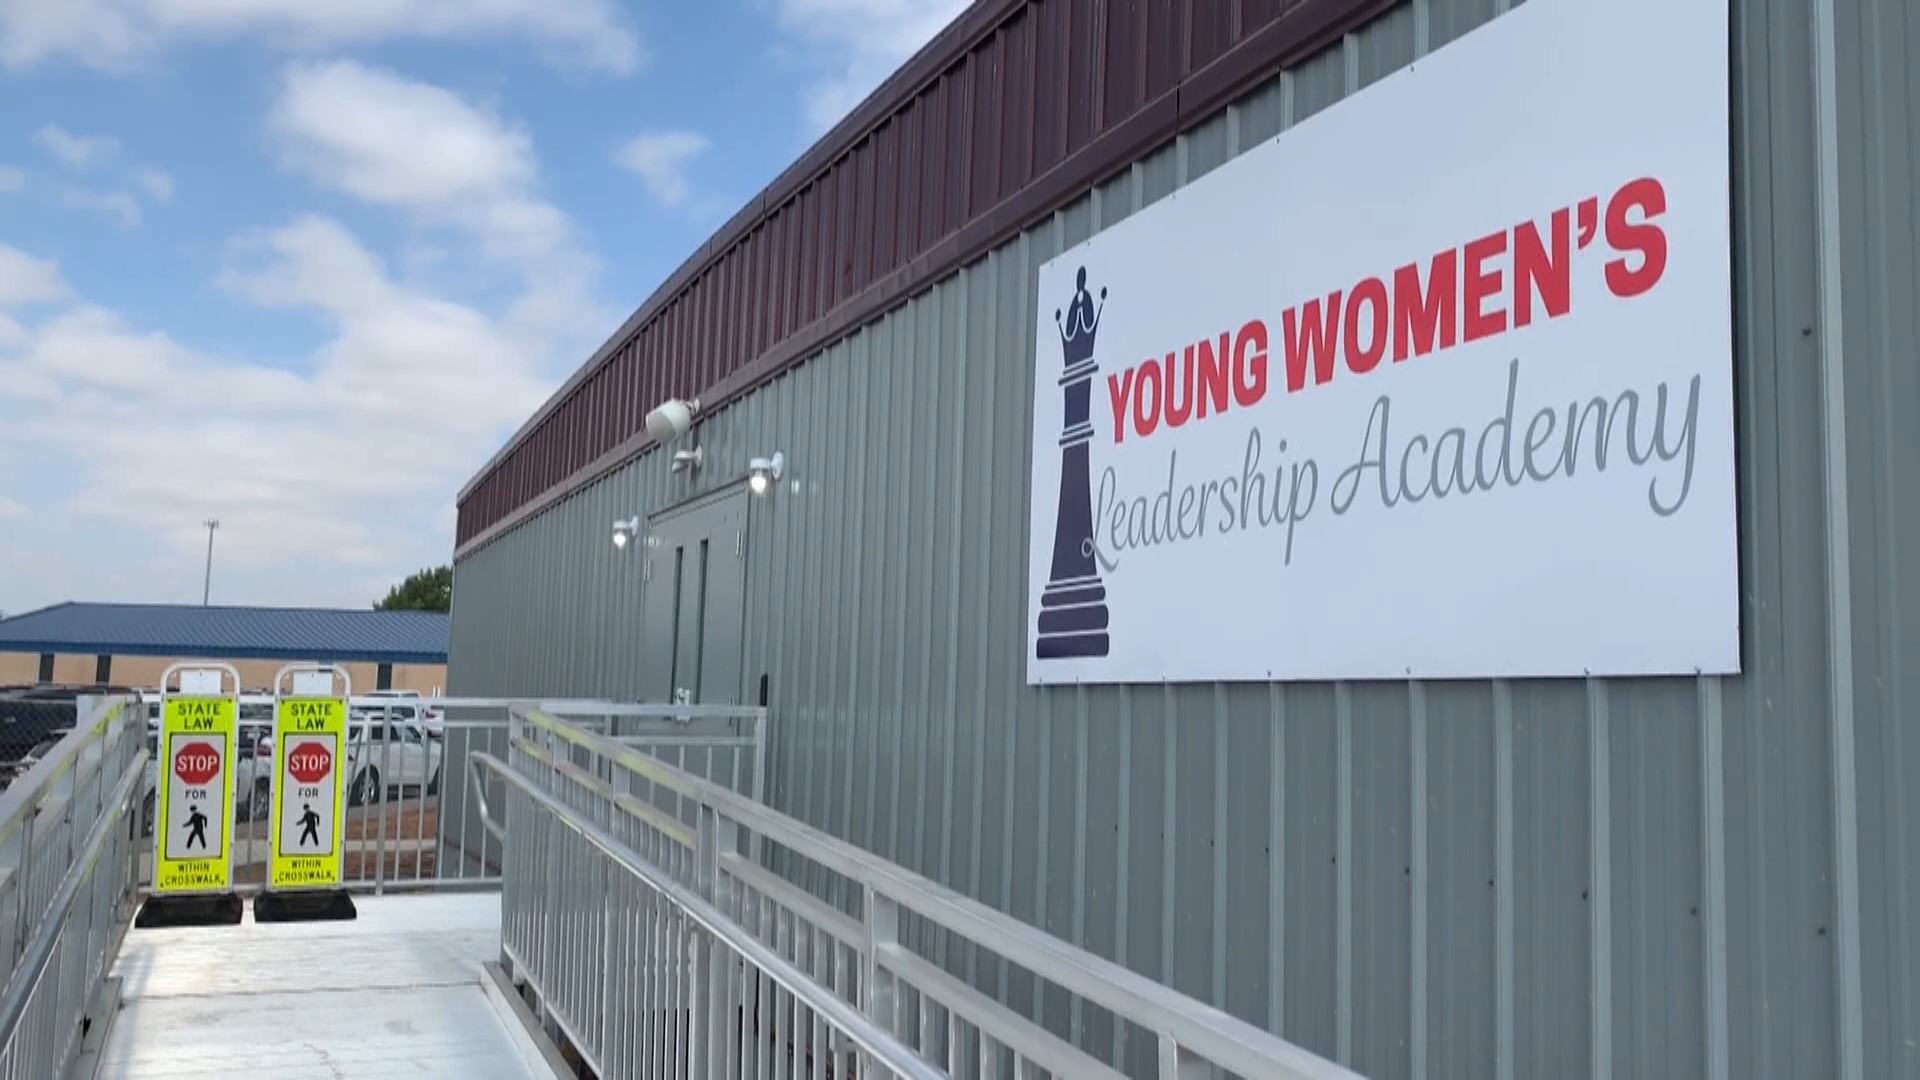 The board is considering two options for the Young Women's Leadership Academy. Keep the school at its location or transition students to Washington STEM Academy.